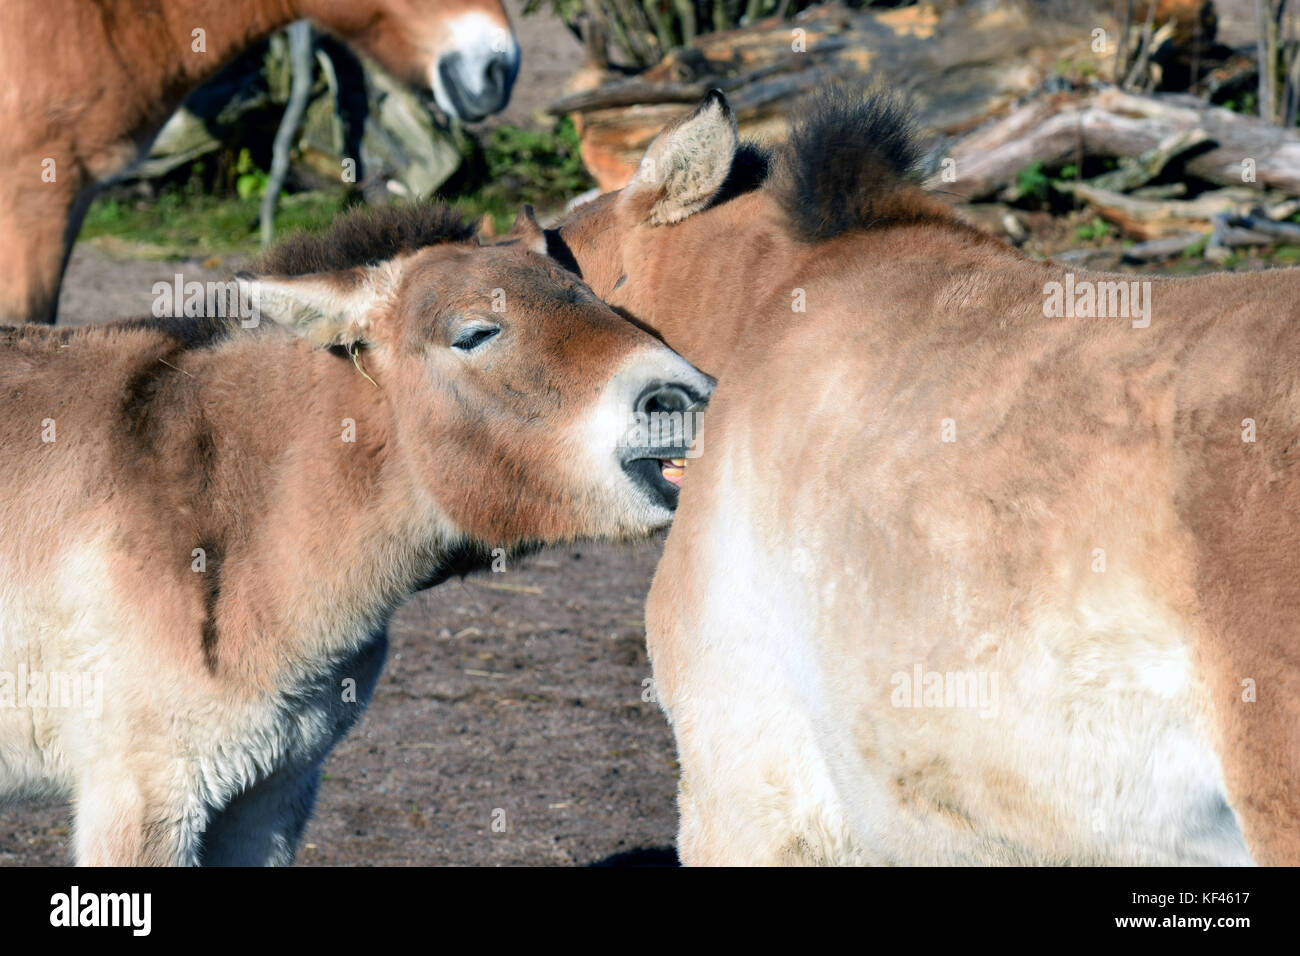 Mongolian wild horse. Also known as Przewalski's or Dzungarian horse. Stock Photo